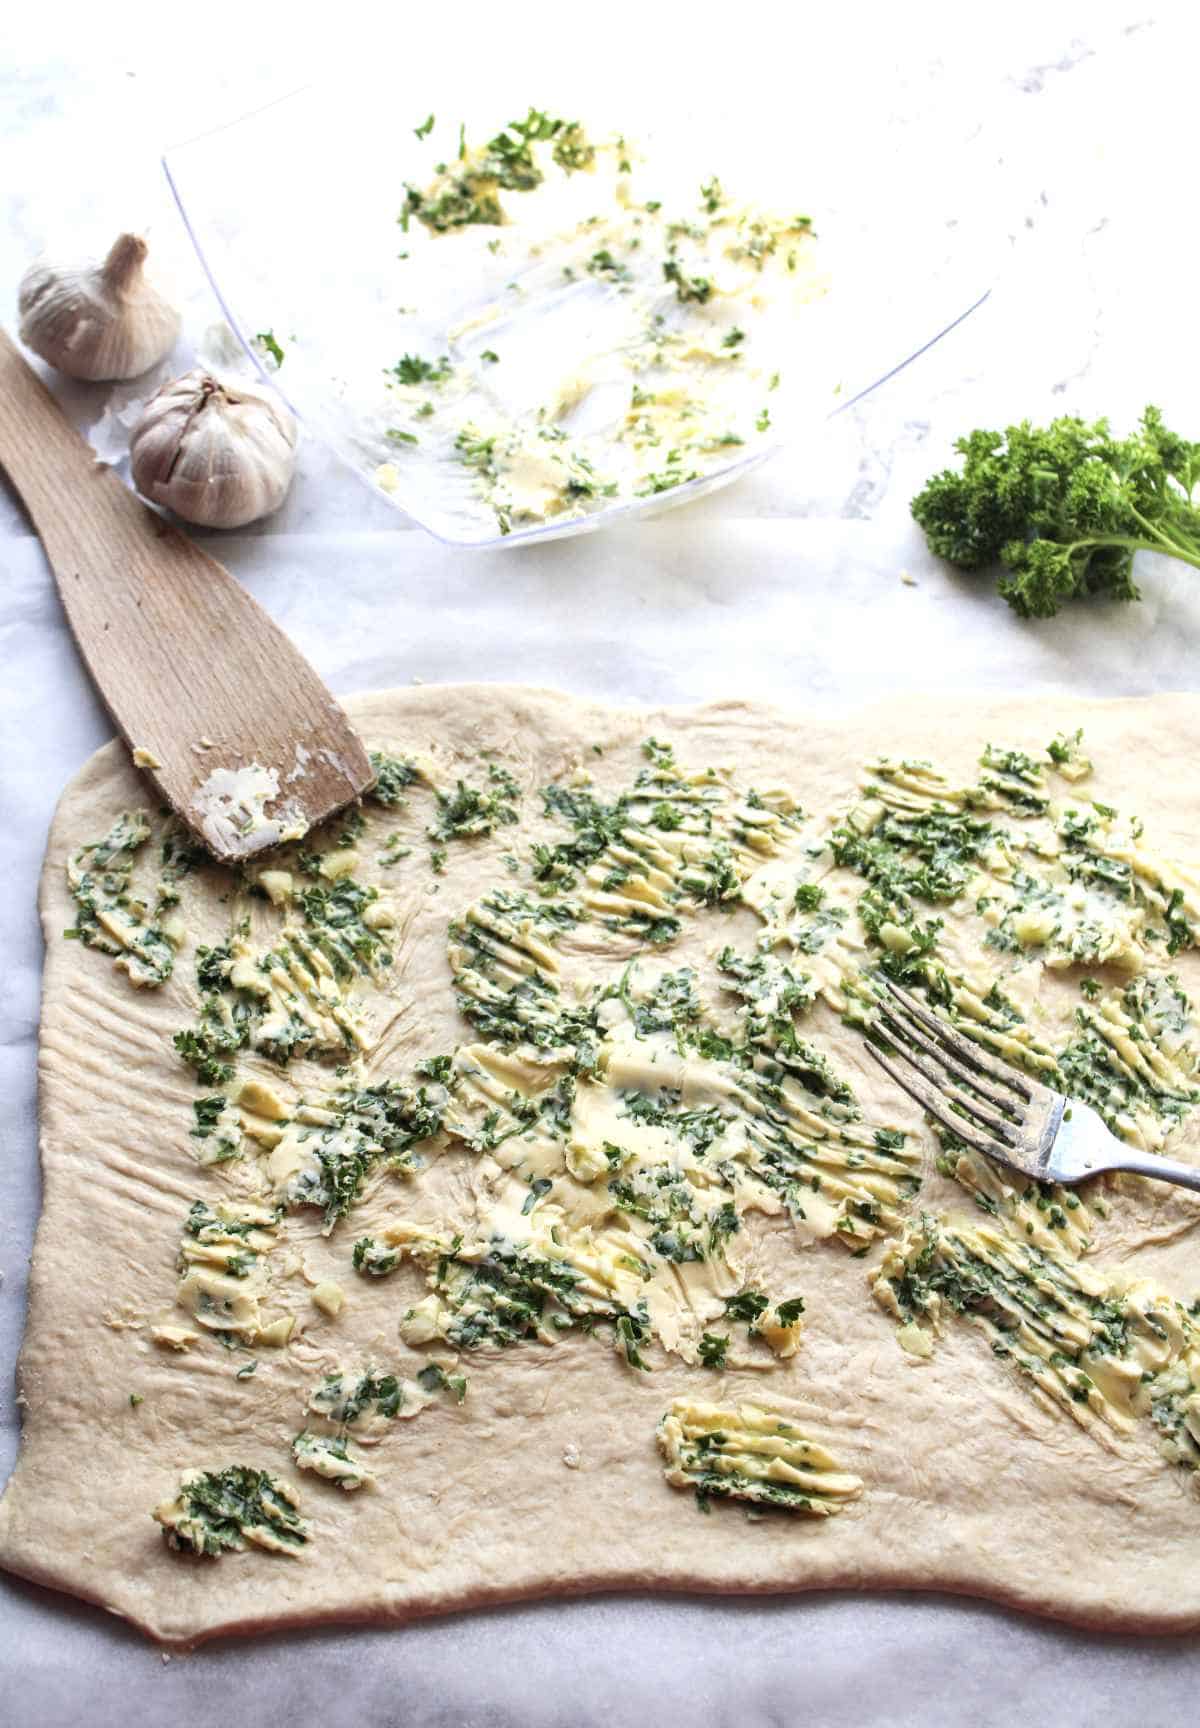 Spreading garlic butter and herbs on a sheet of rolled out bread dough.